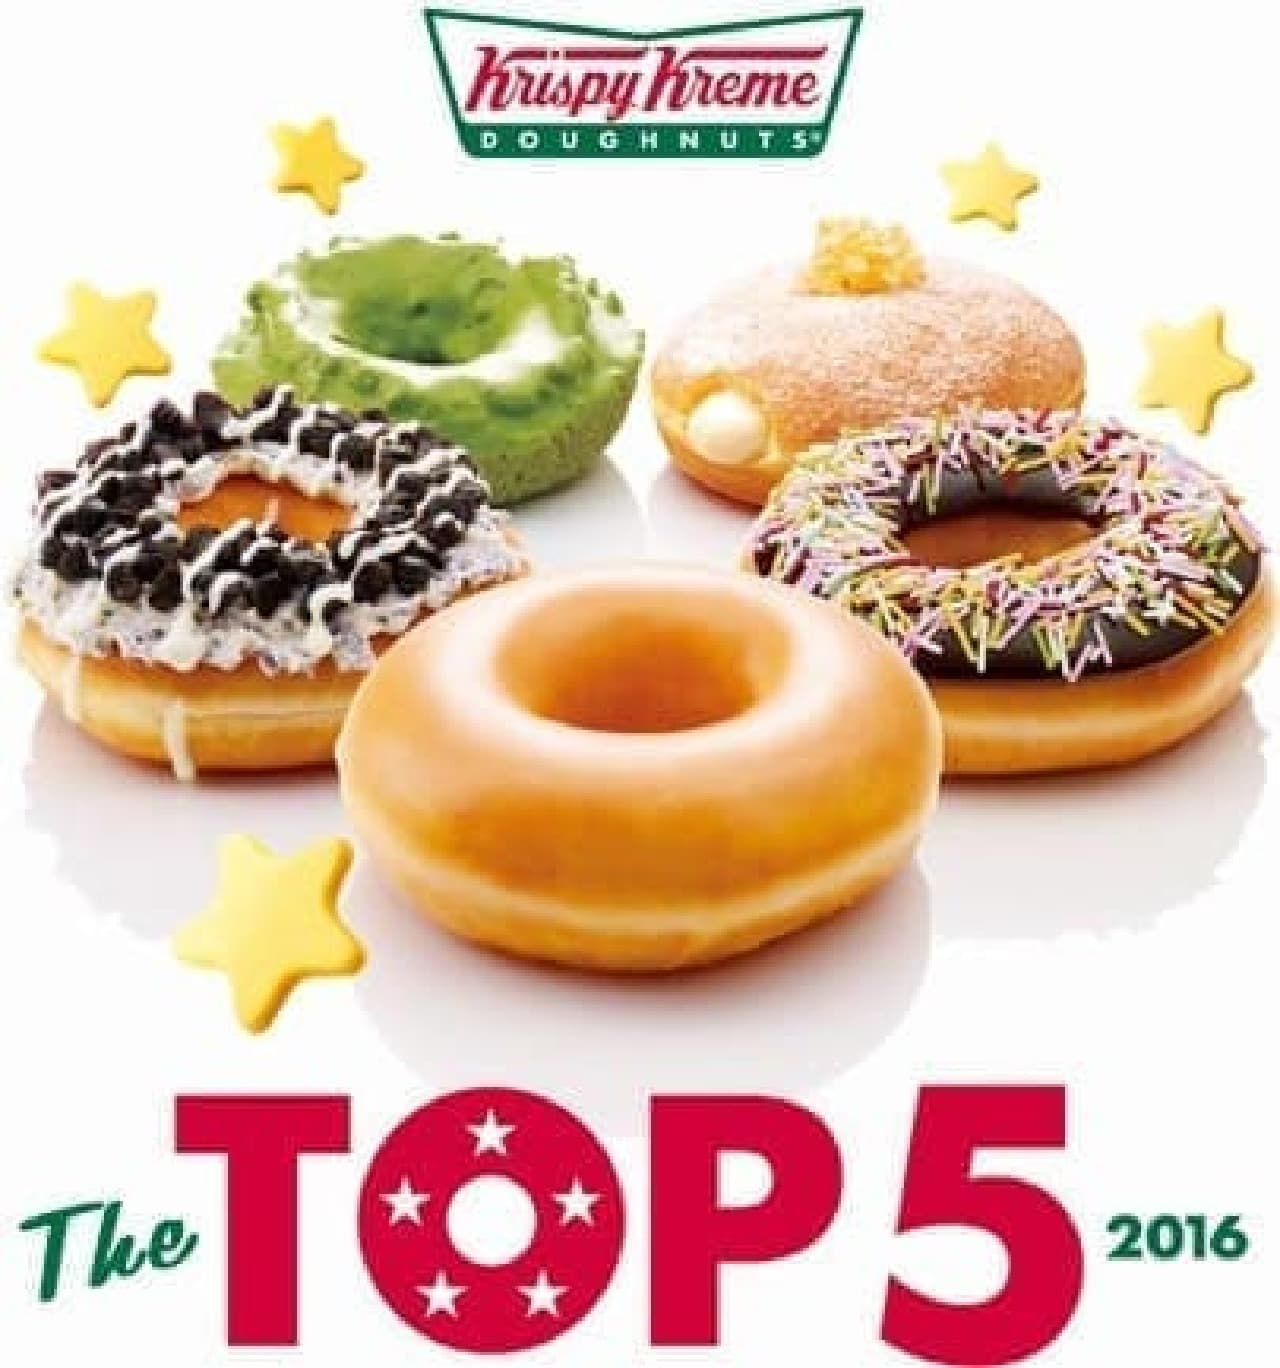 After all, the most popular donut is ...?